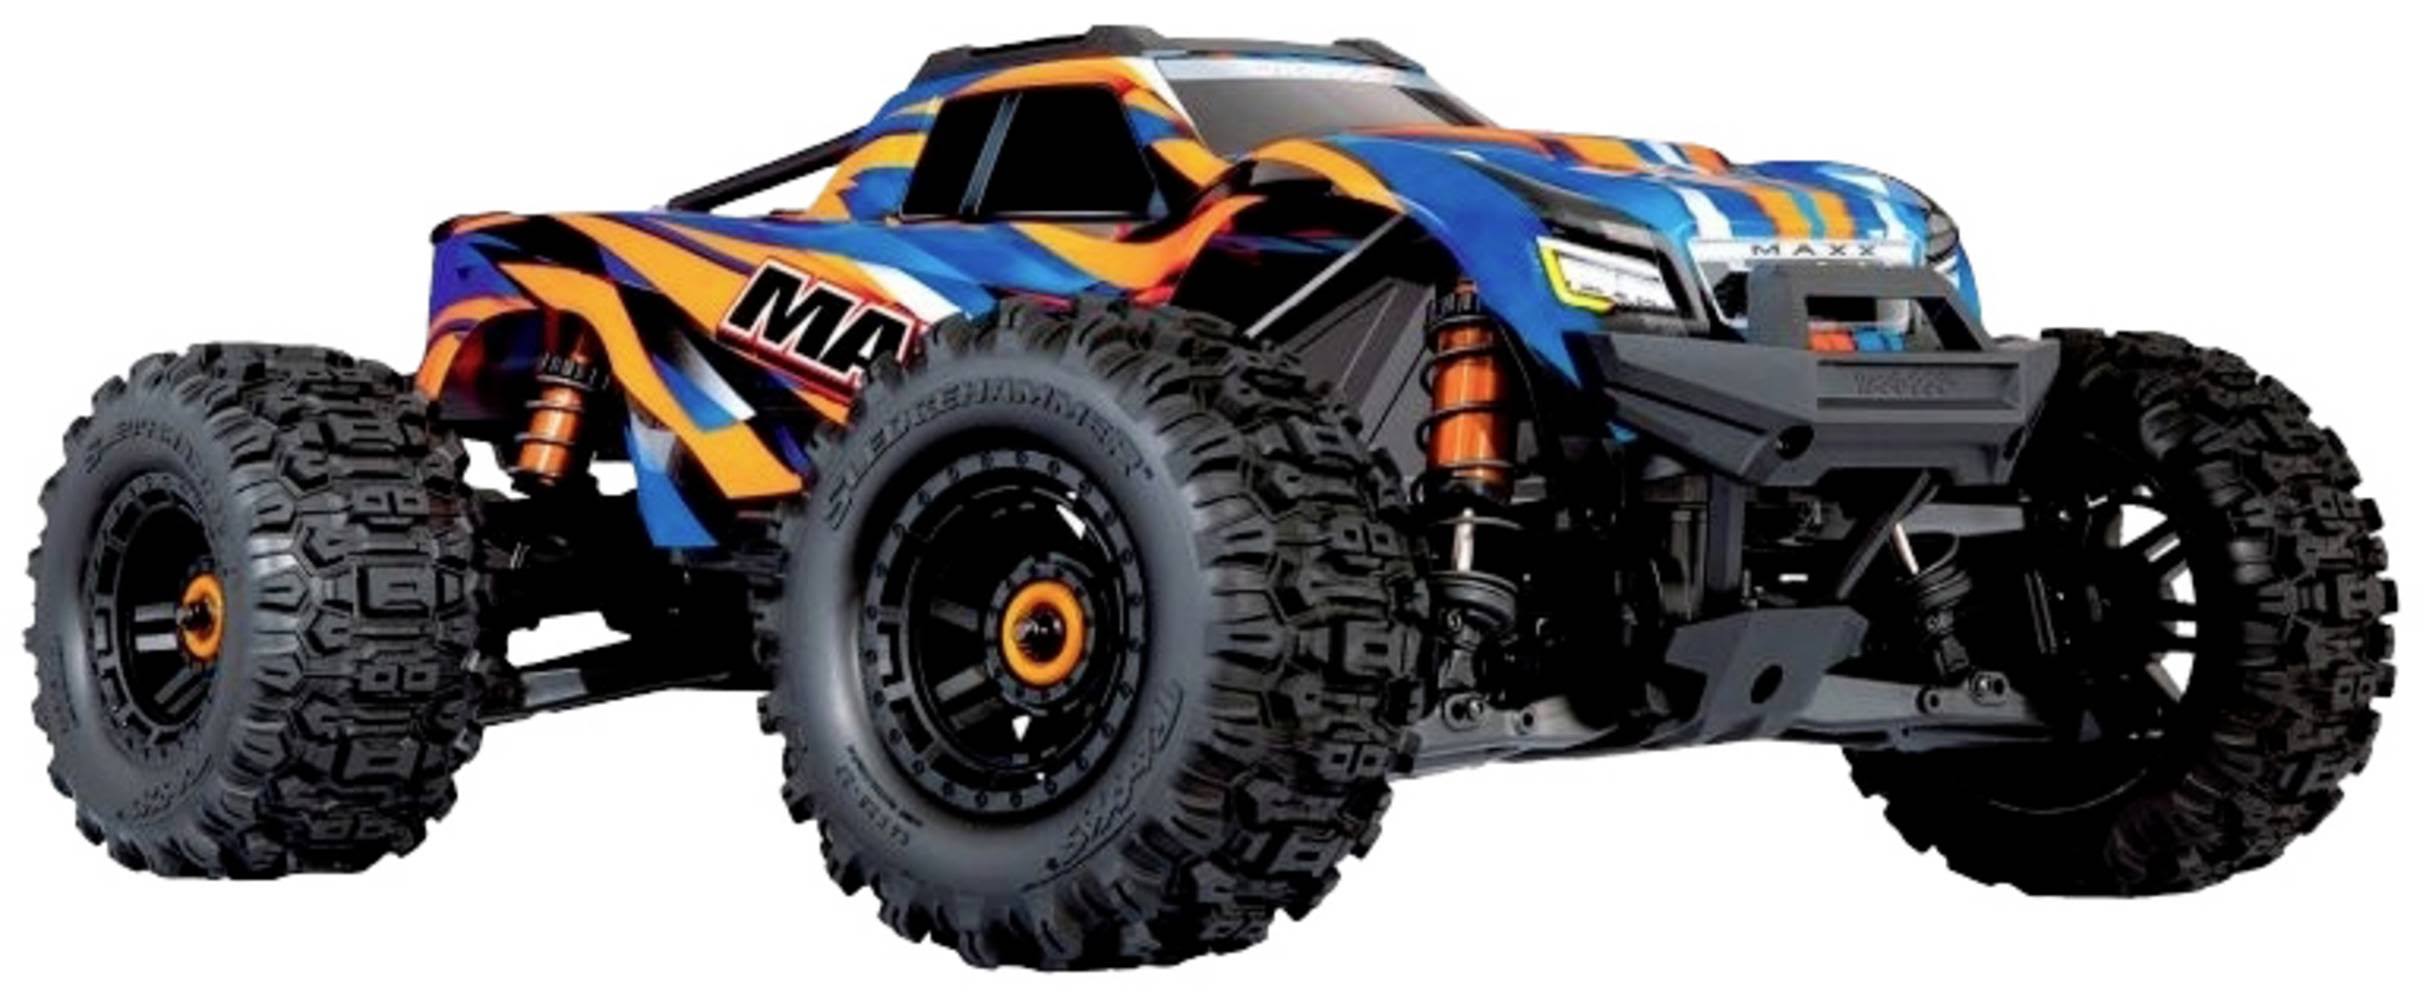 Traxxas 89086-4 Maxx V2 with WideMaxx 1/10 Electric RC Monster Truck Orange